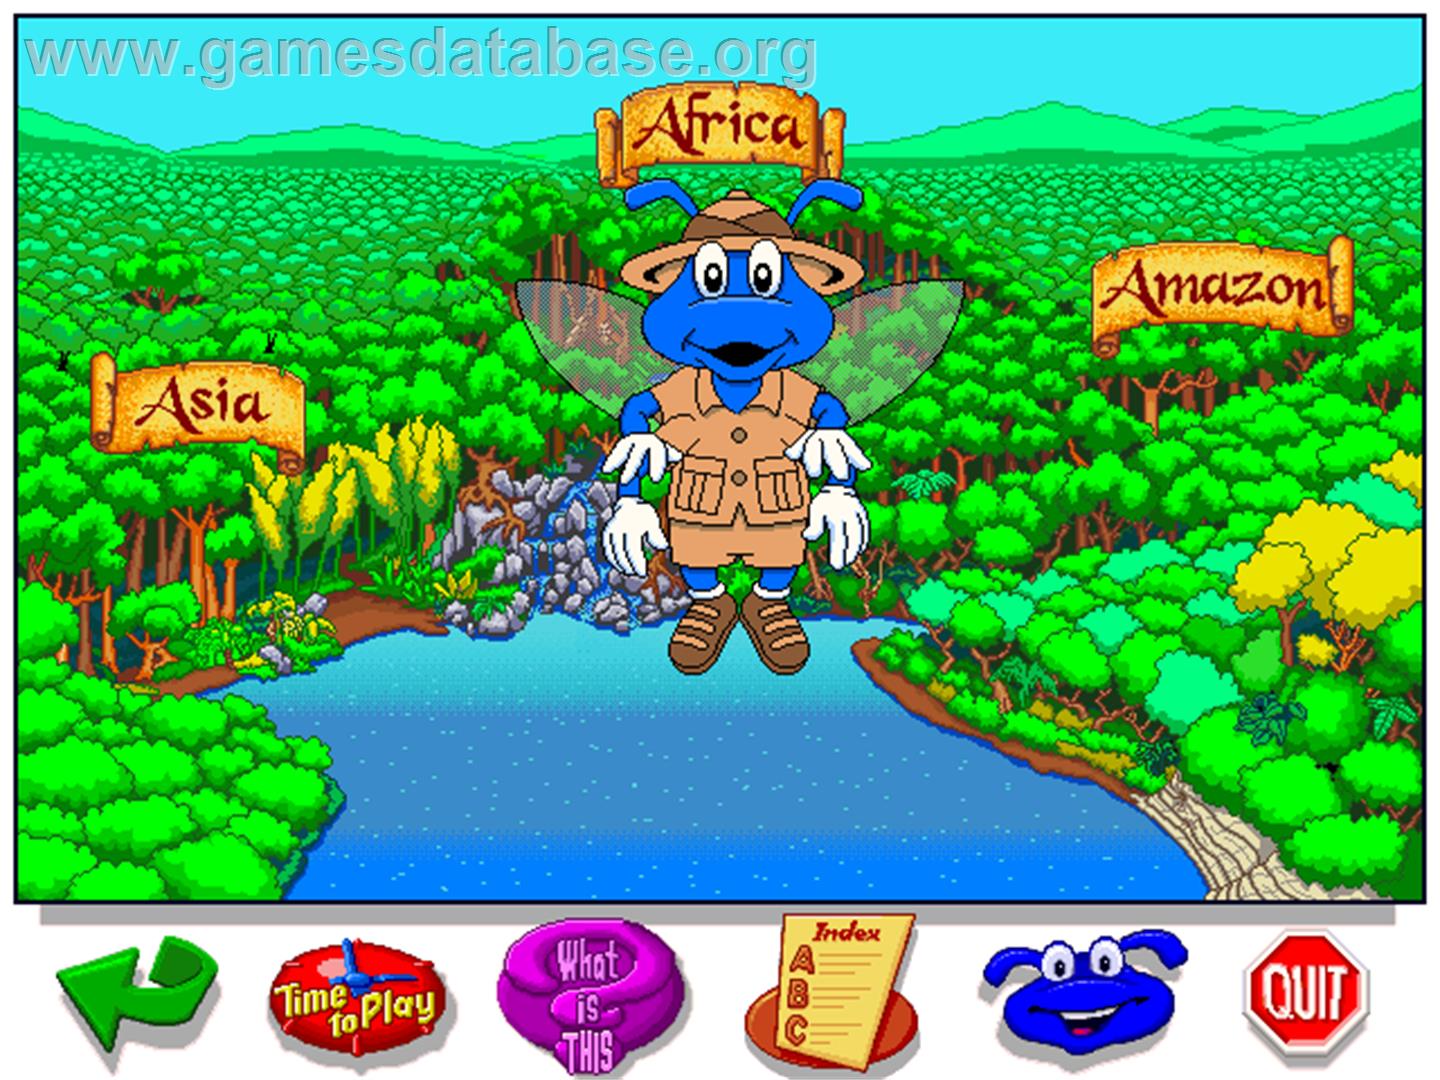 Let's Explore the Jungle with Buzzy - ScummVM - Artwork - In Game